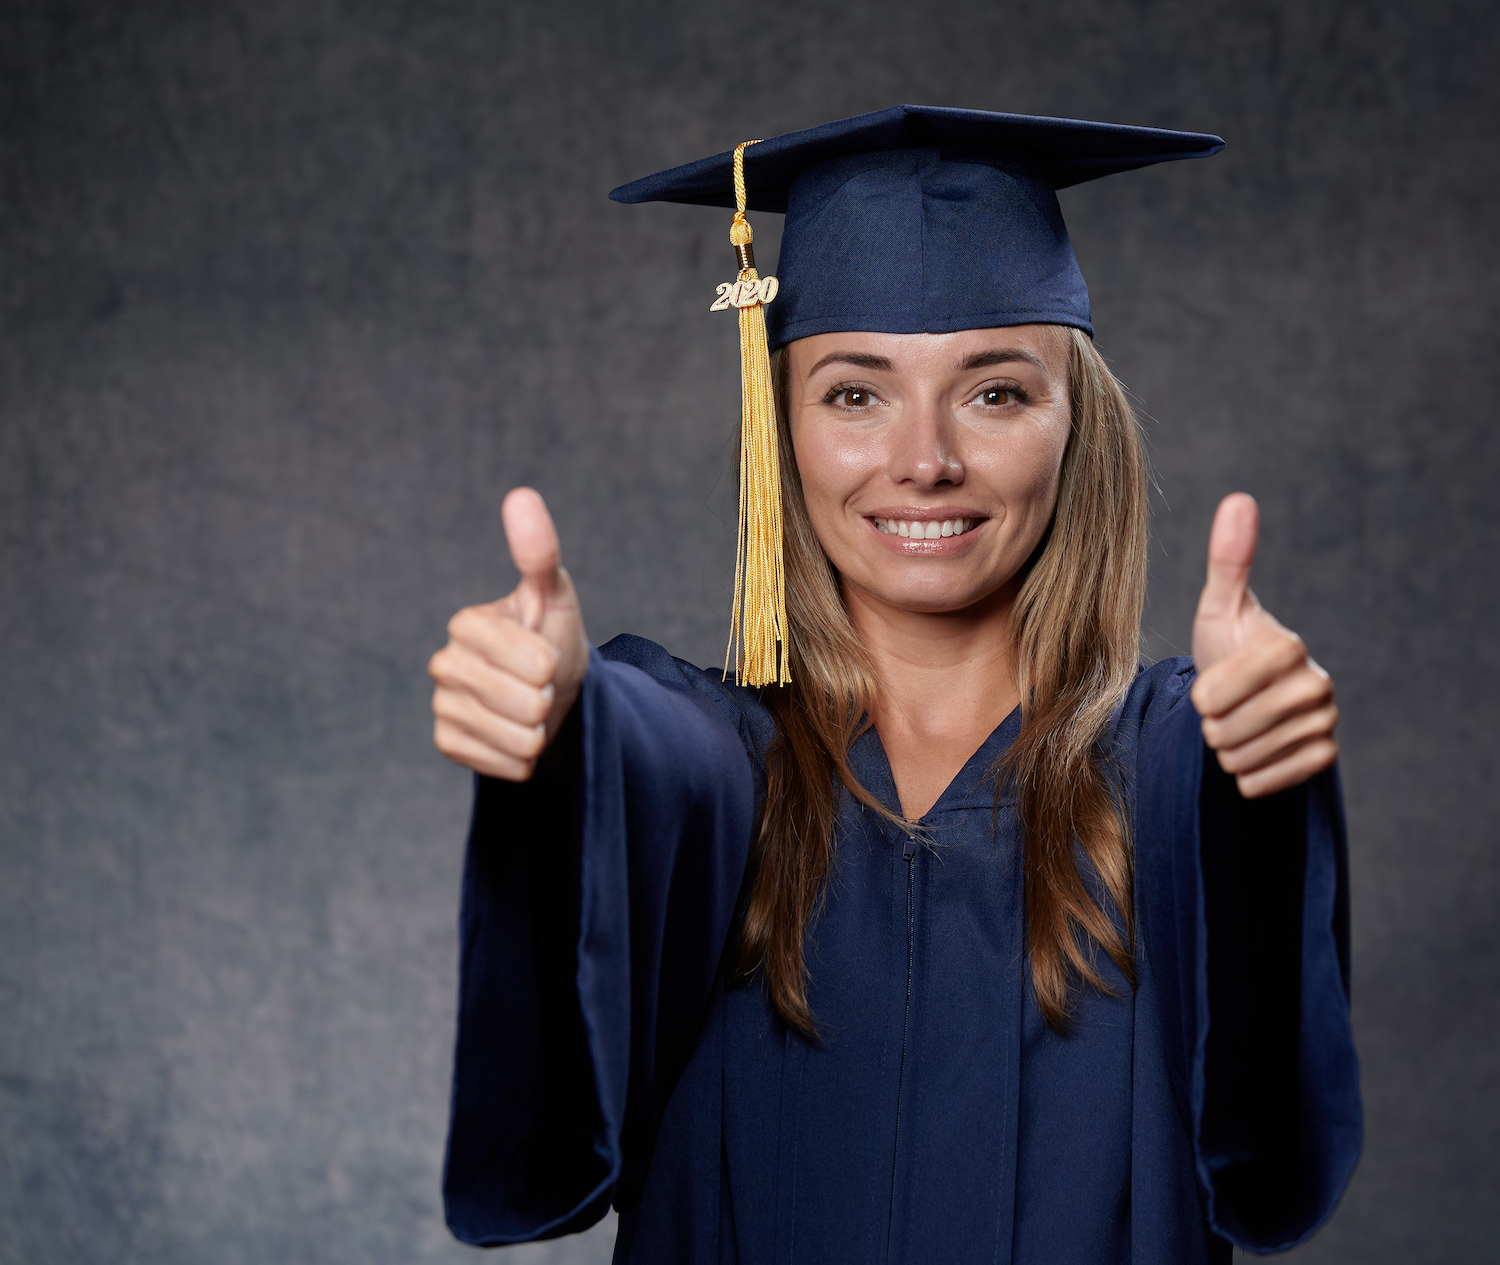 Smiling young woman thumbs up celebrating her university degree wearing blue cap and gown